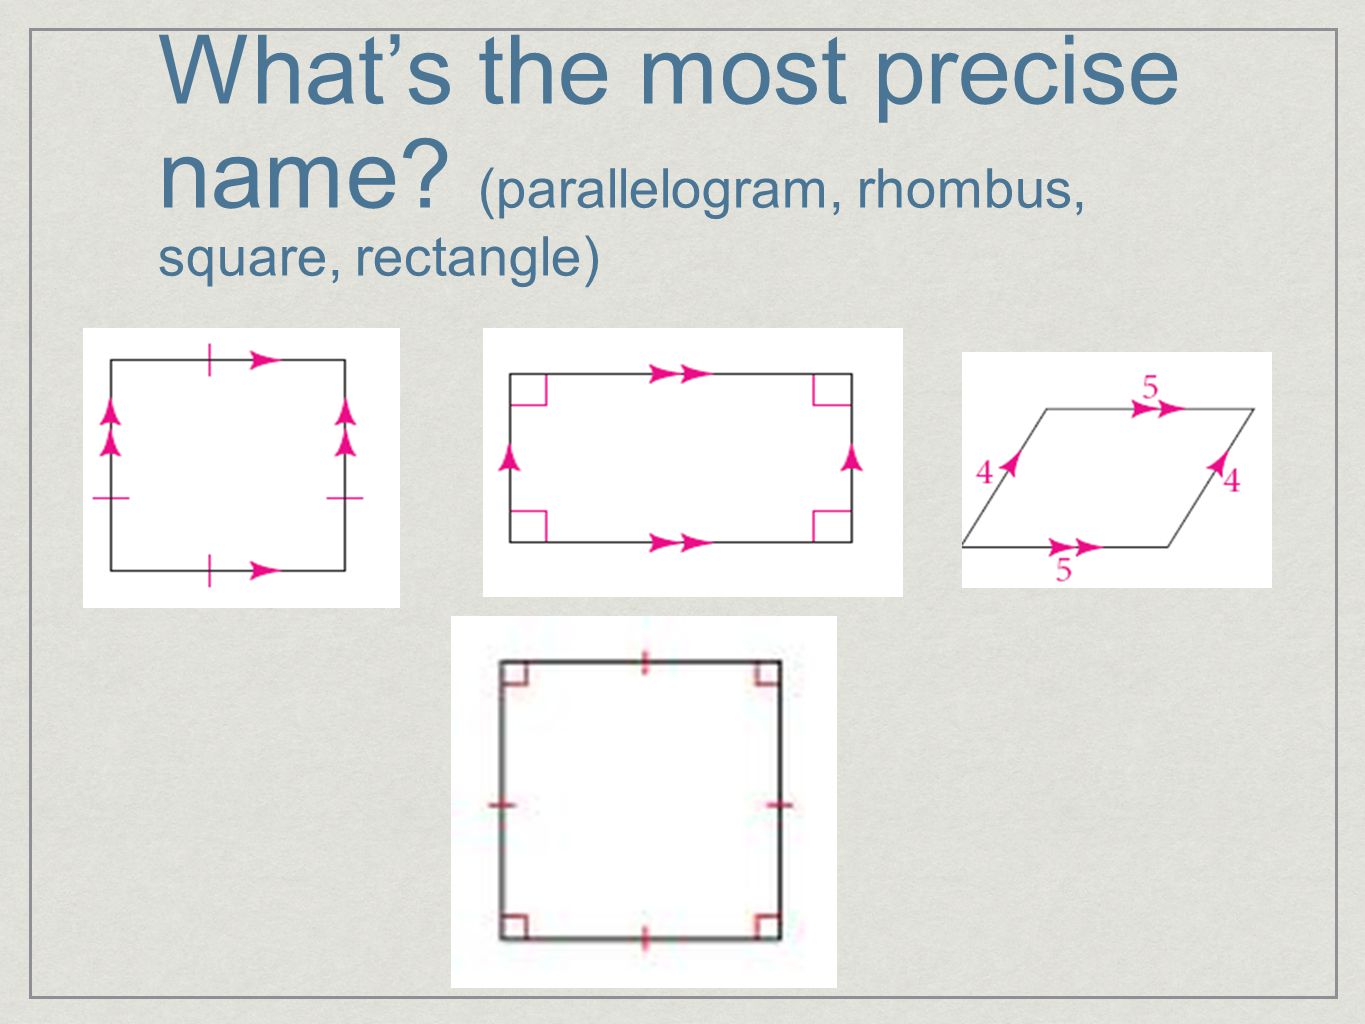 What’s the most precise name (parallelogram, rhombus, square, rectangle)